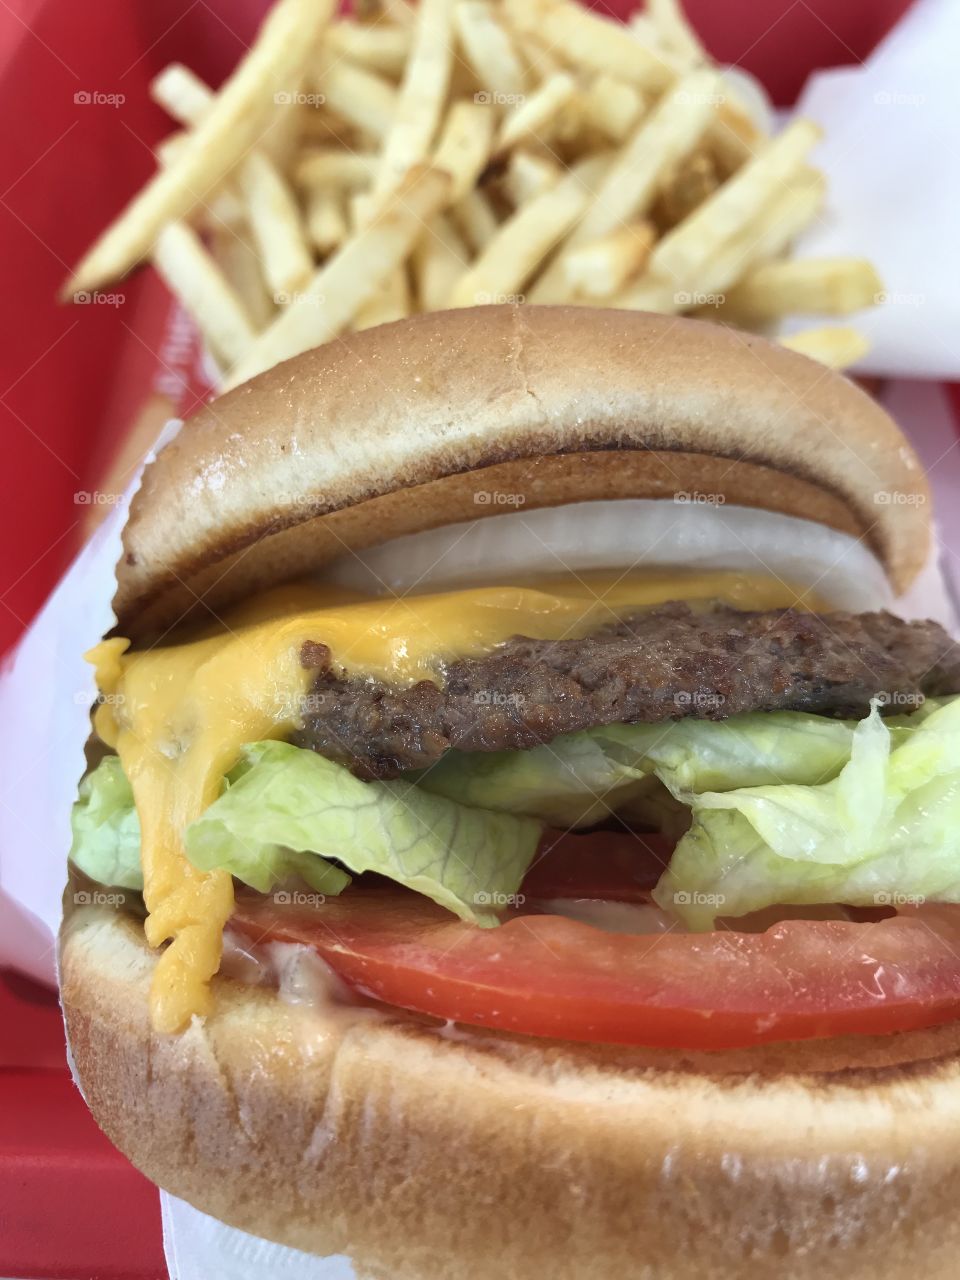 In-N-Out Burger always hits the spot. When craving a burger I either go to my local burger joint or at the least to In-N-Out burger. It beats McDs. #NoFilter